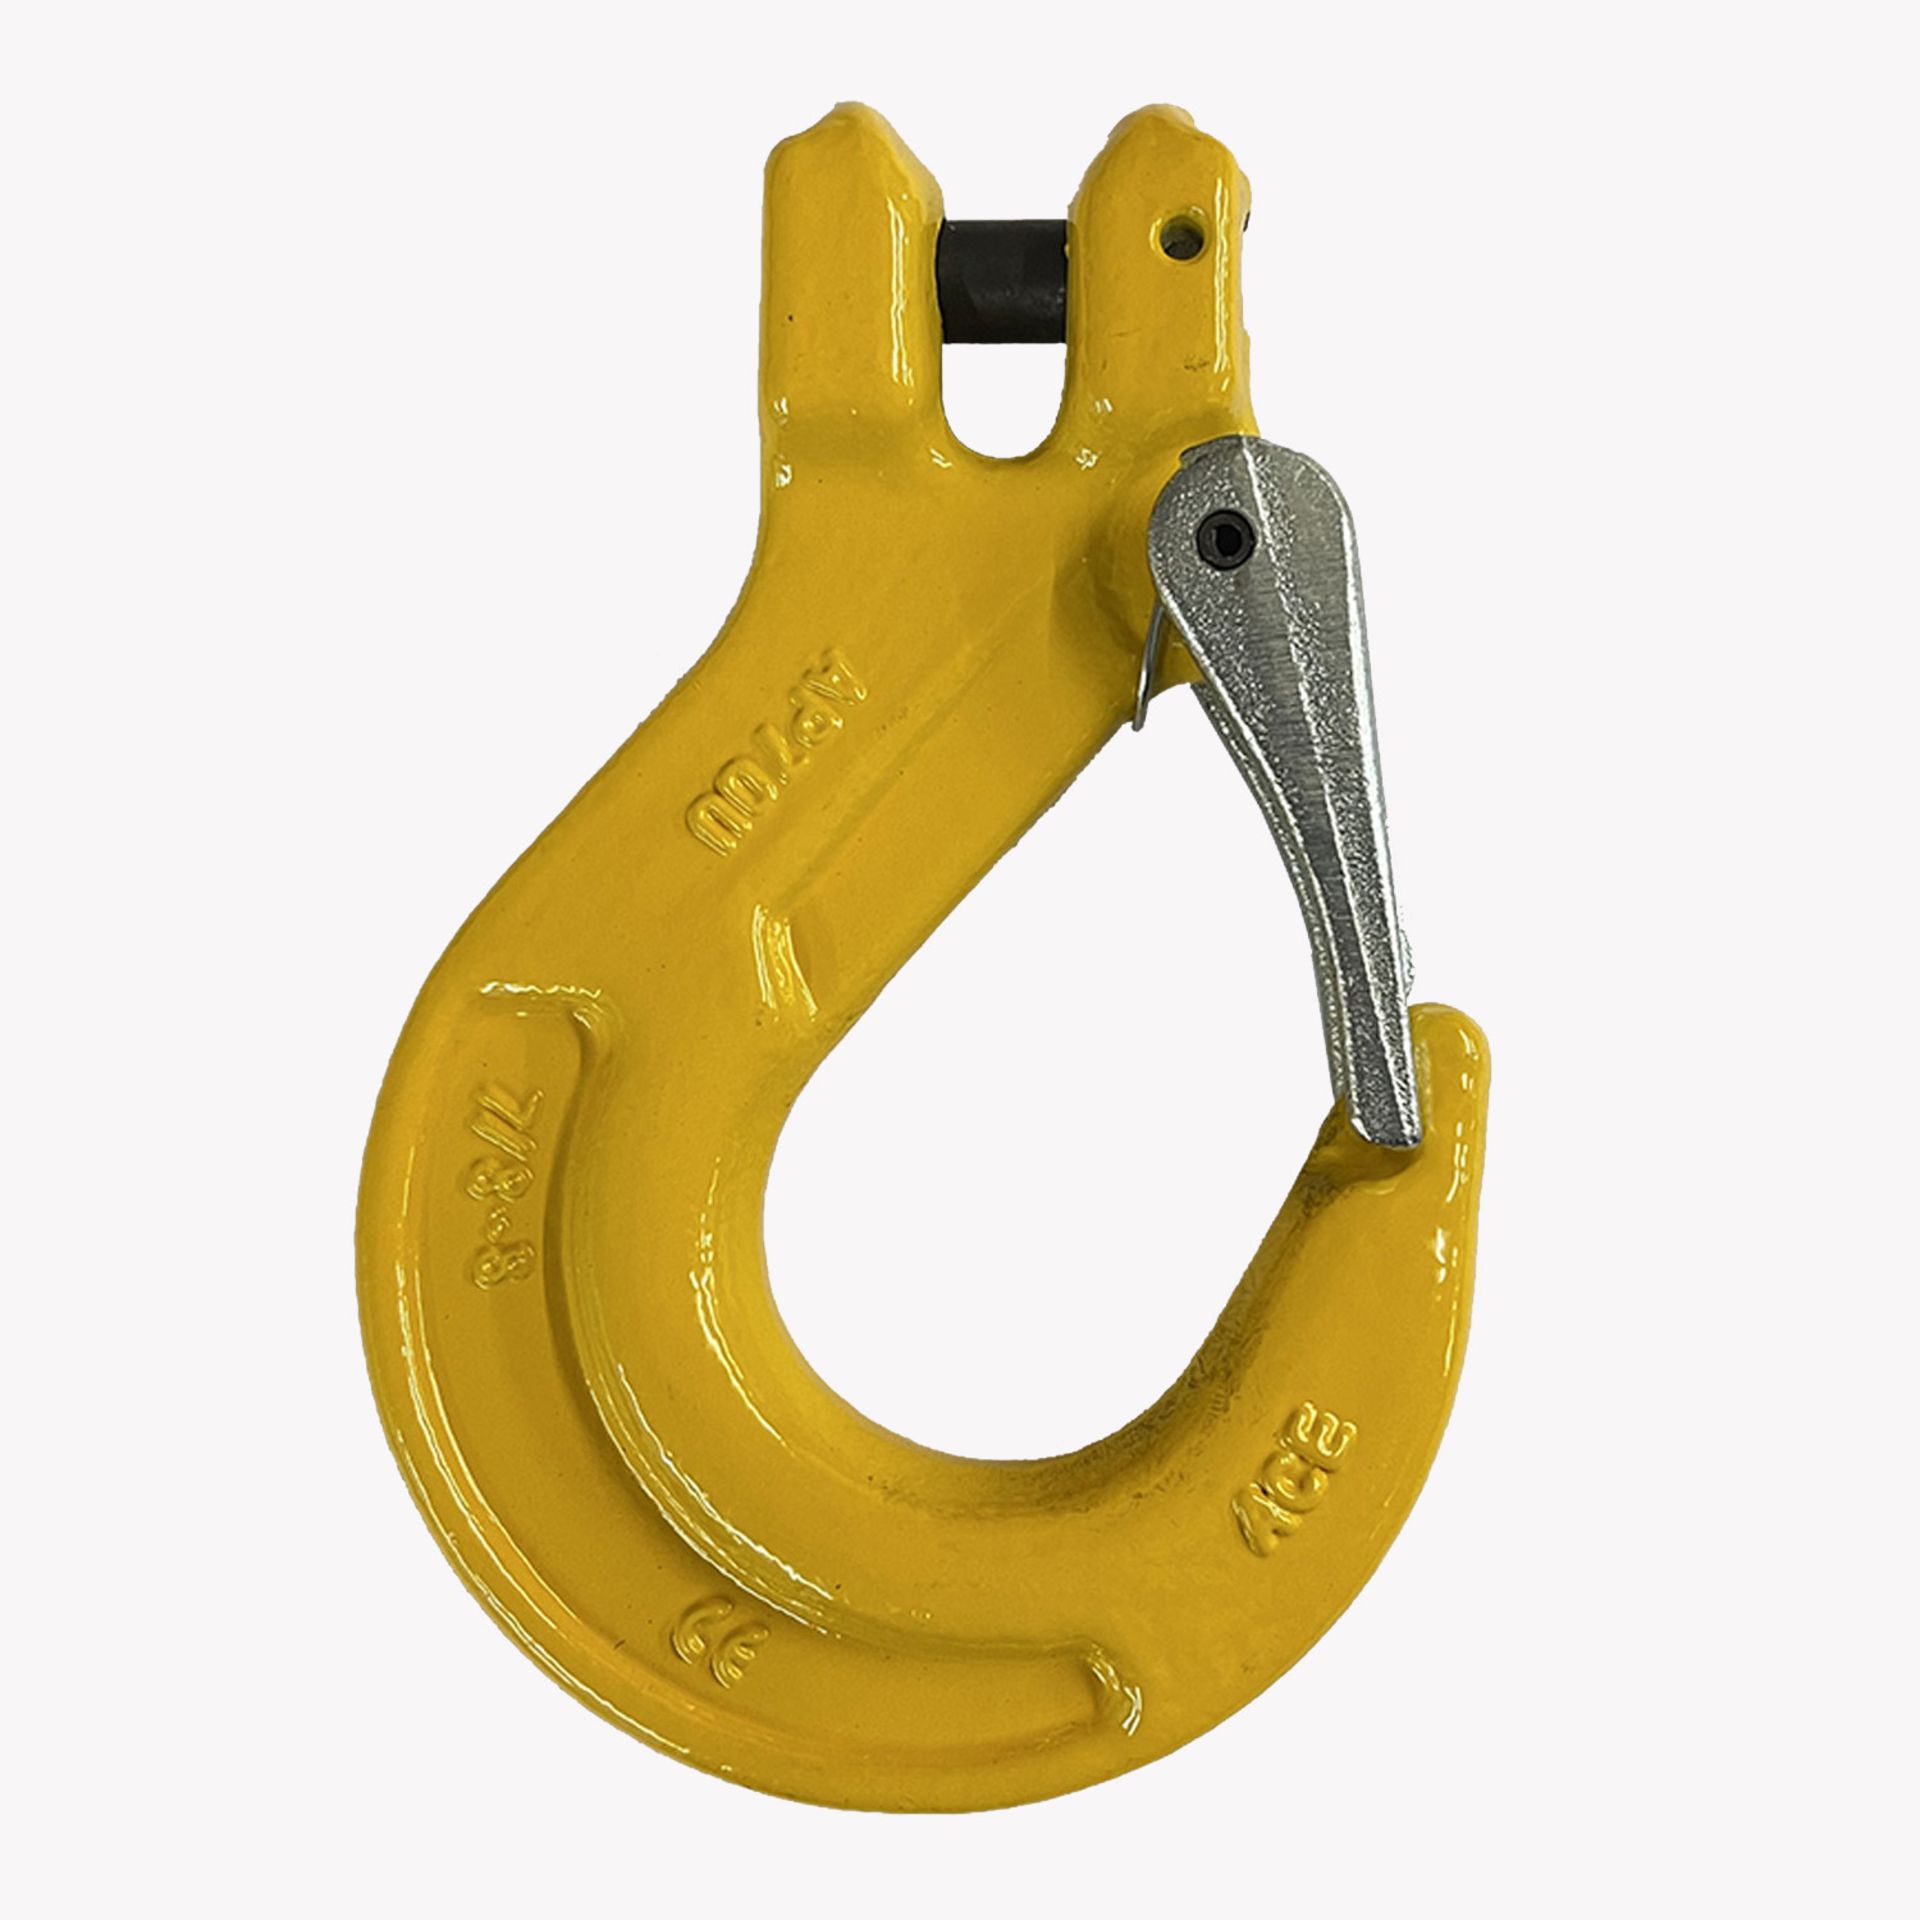 6 X 13mm Grade 8 Clevis Sling Hook With Safety Catch (Yascsh13)